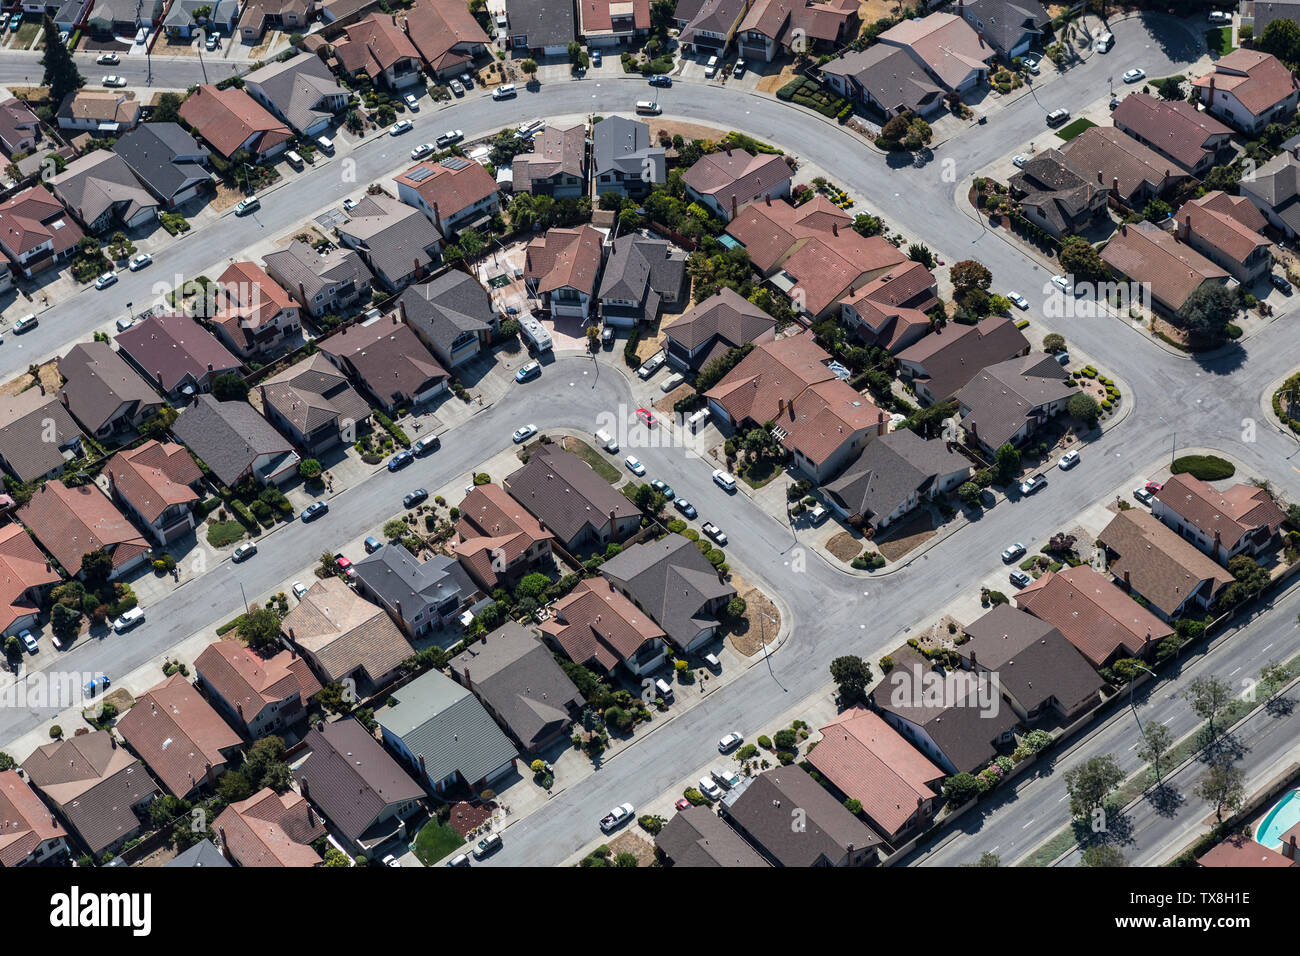 Aerial view of tightly packed middle class homes and streets near Oakland, California. Stock Photo